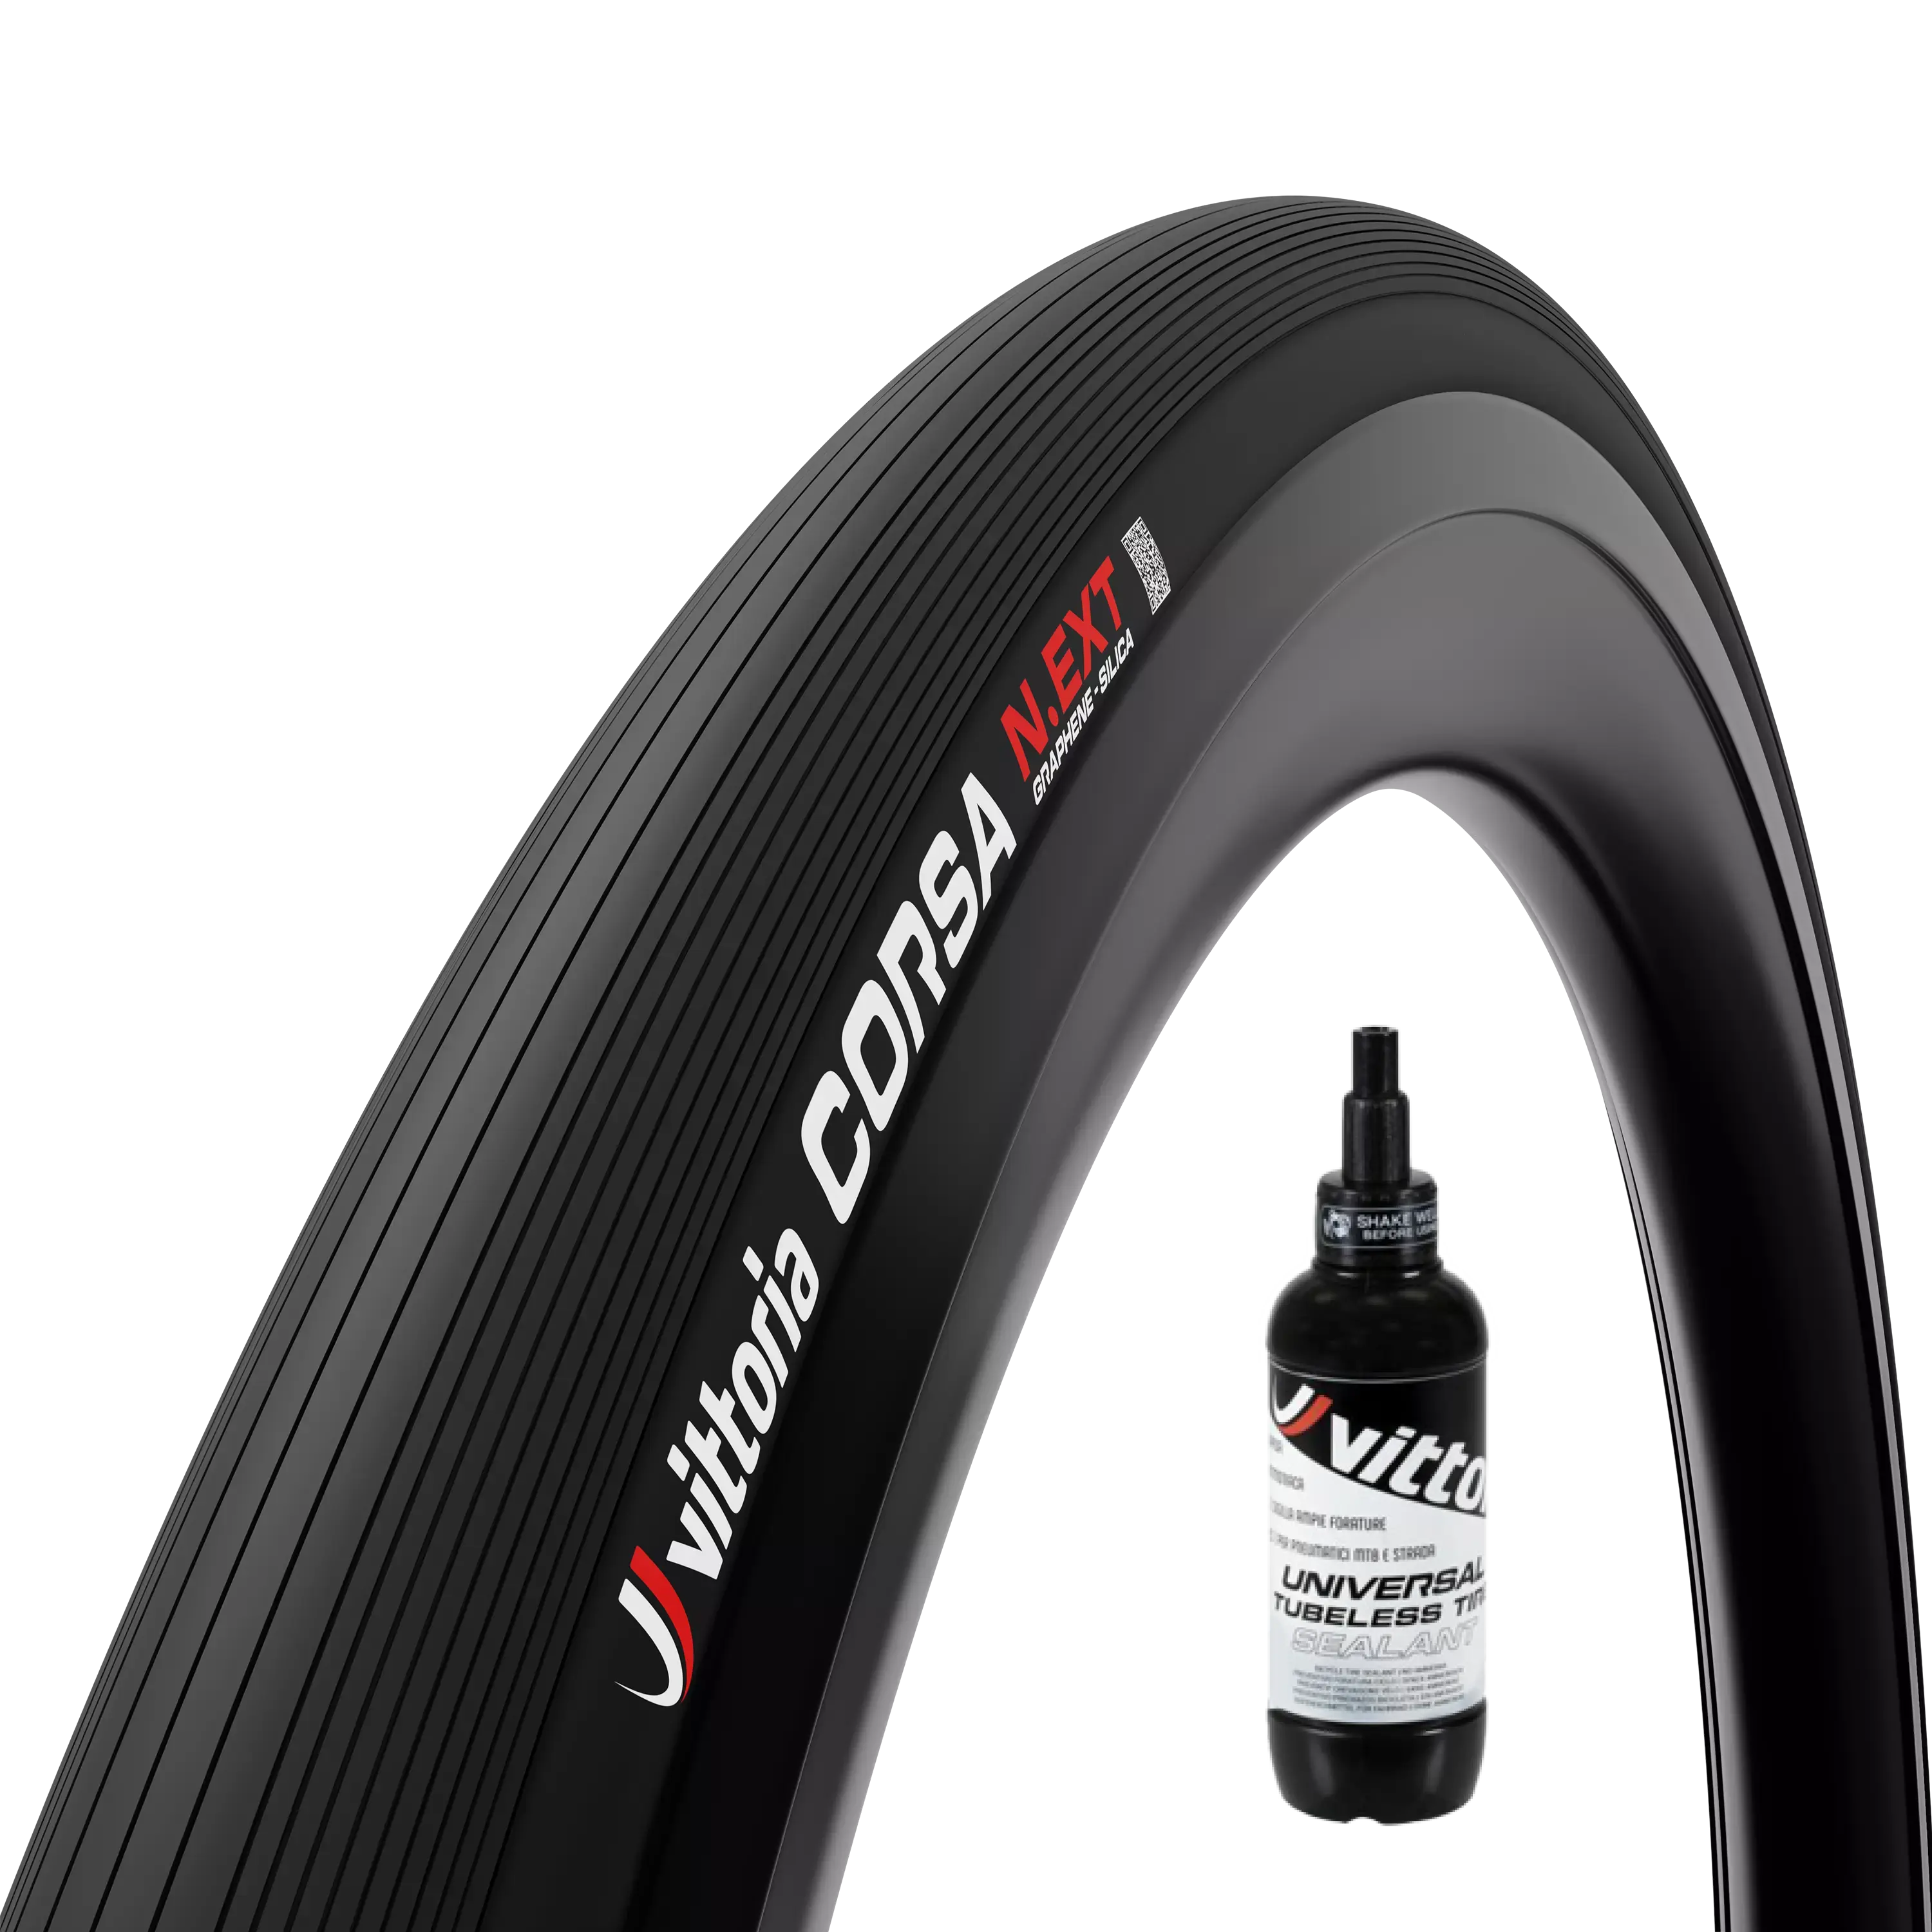 Tubeless accessories: choose the best for your bike